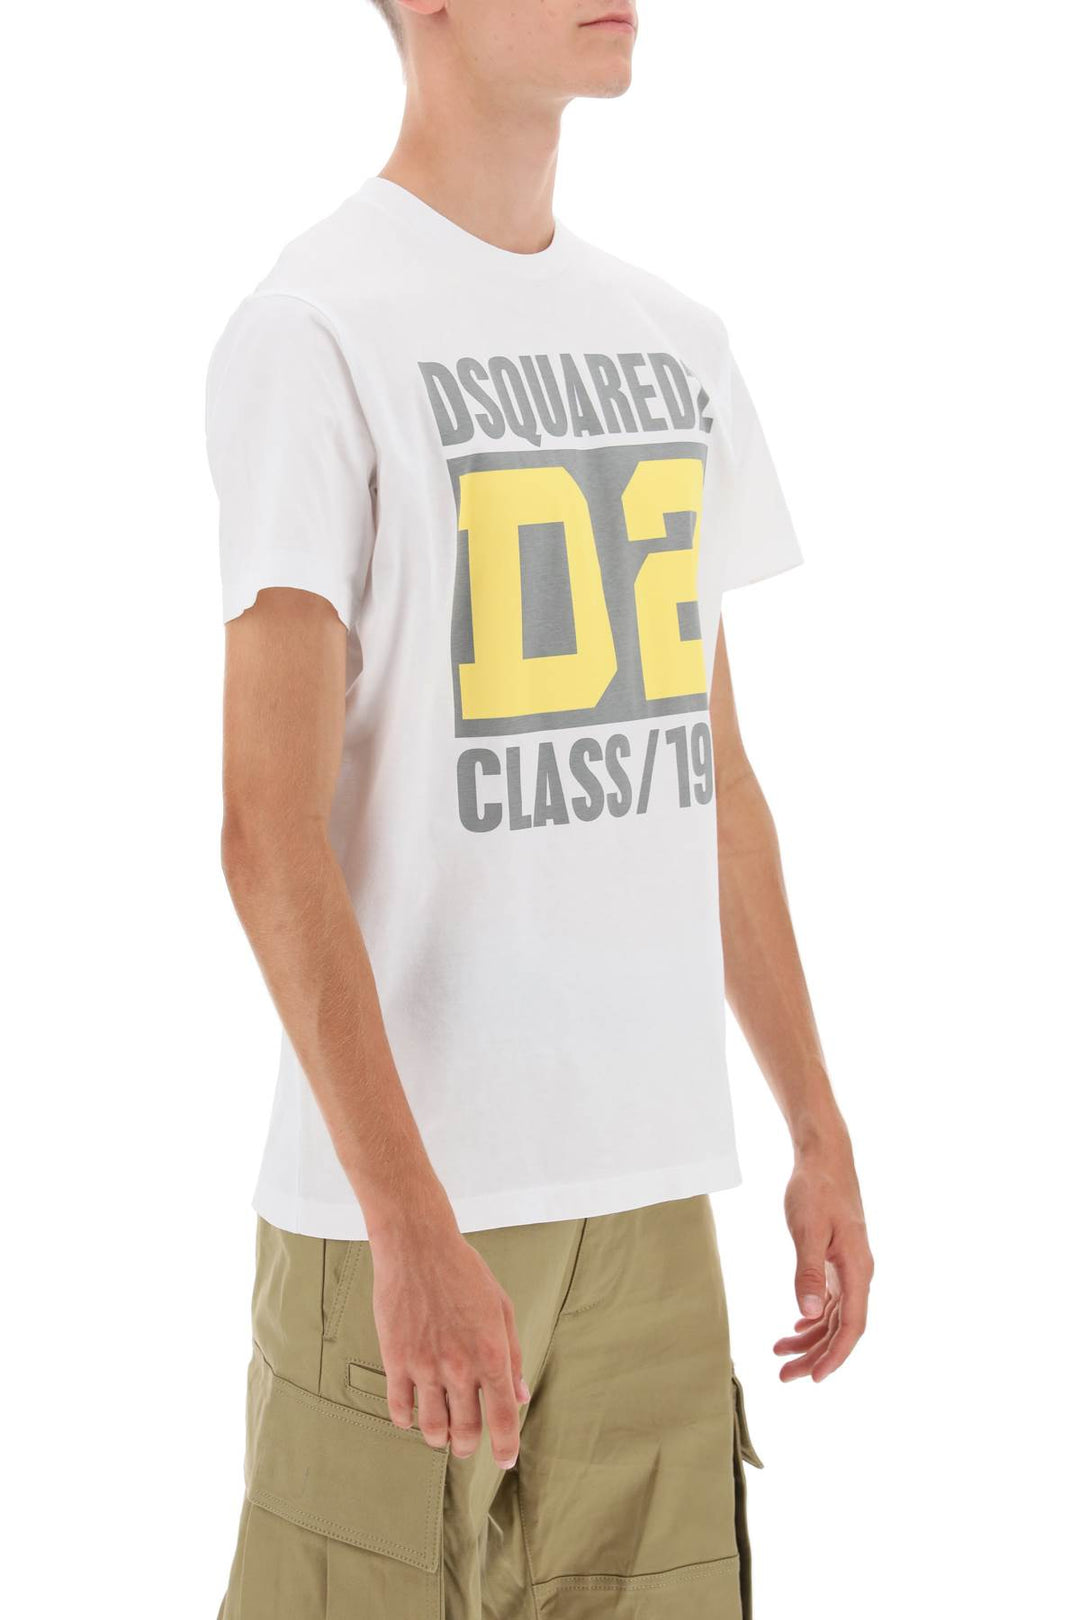 T Shirt Fit Cool 'D2 Class 1964' - Dsquared2 - Uomo